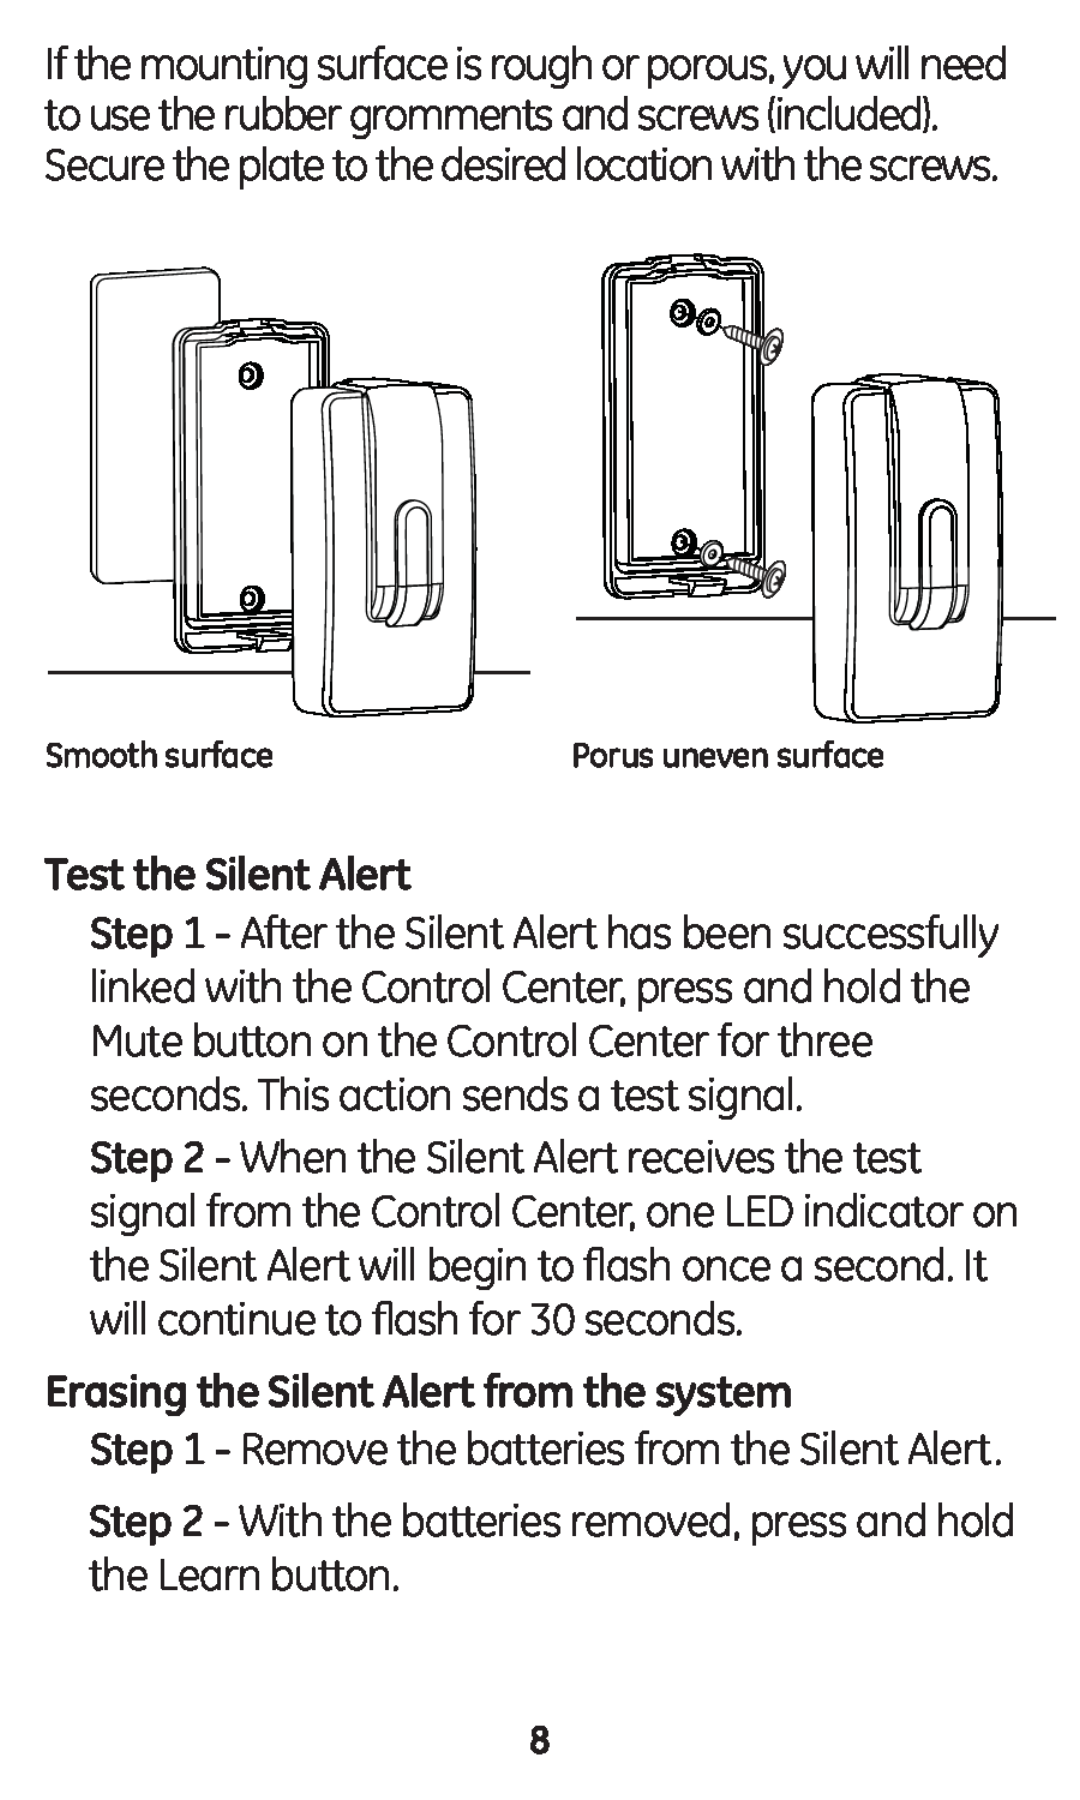 GE 45137 user manual Test the Silent Alert, Erasing the Silent Alert from the system, Smooth surface 